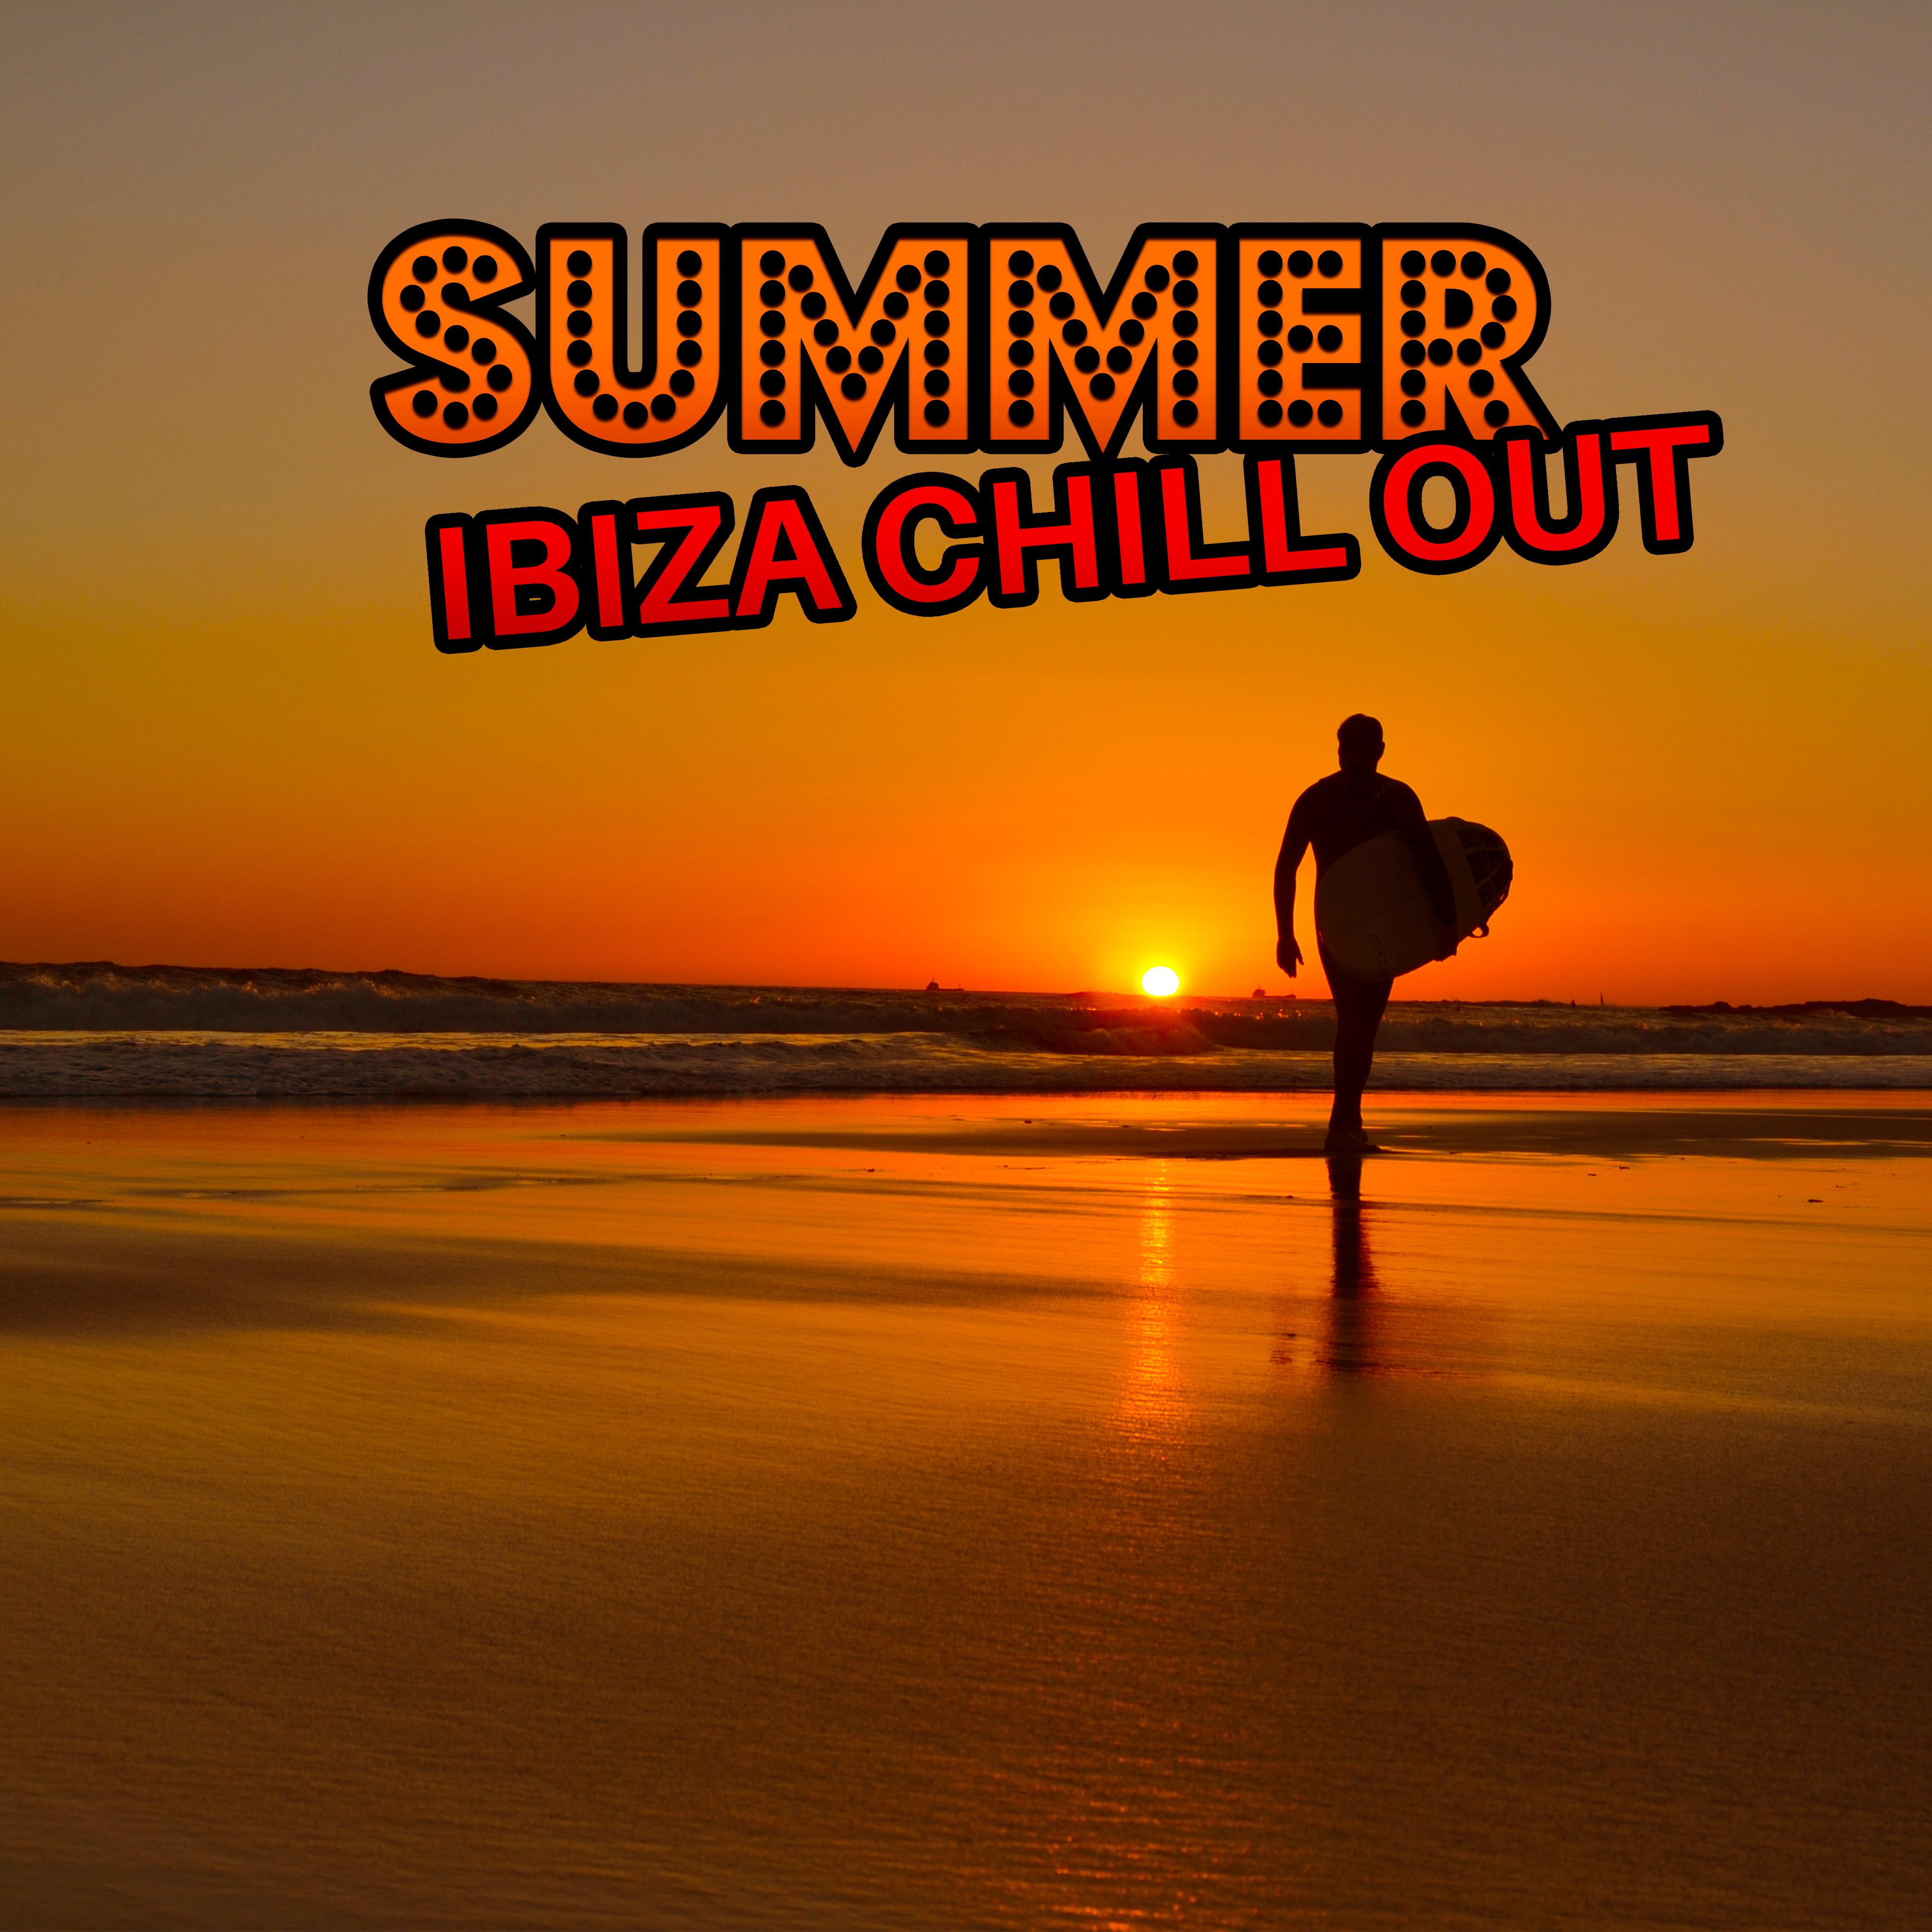 Summer Ibiza Chill Out  Rest on the Beach, Summer Sun  Sand, Easy Listening, Calm Down